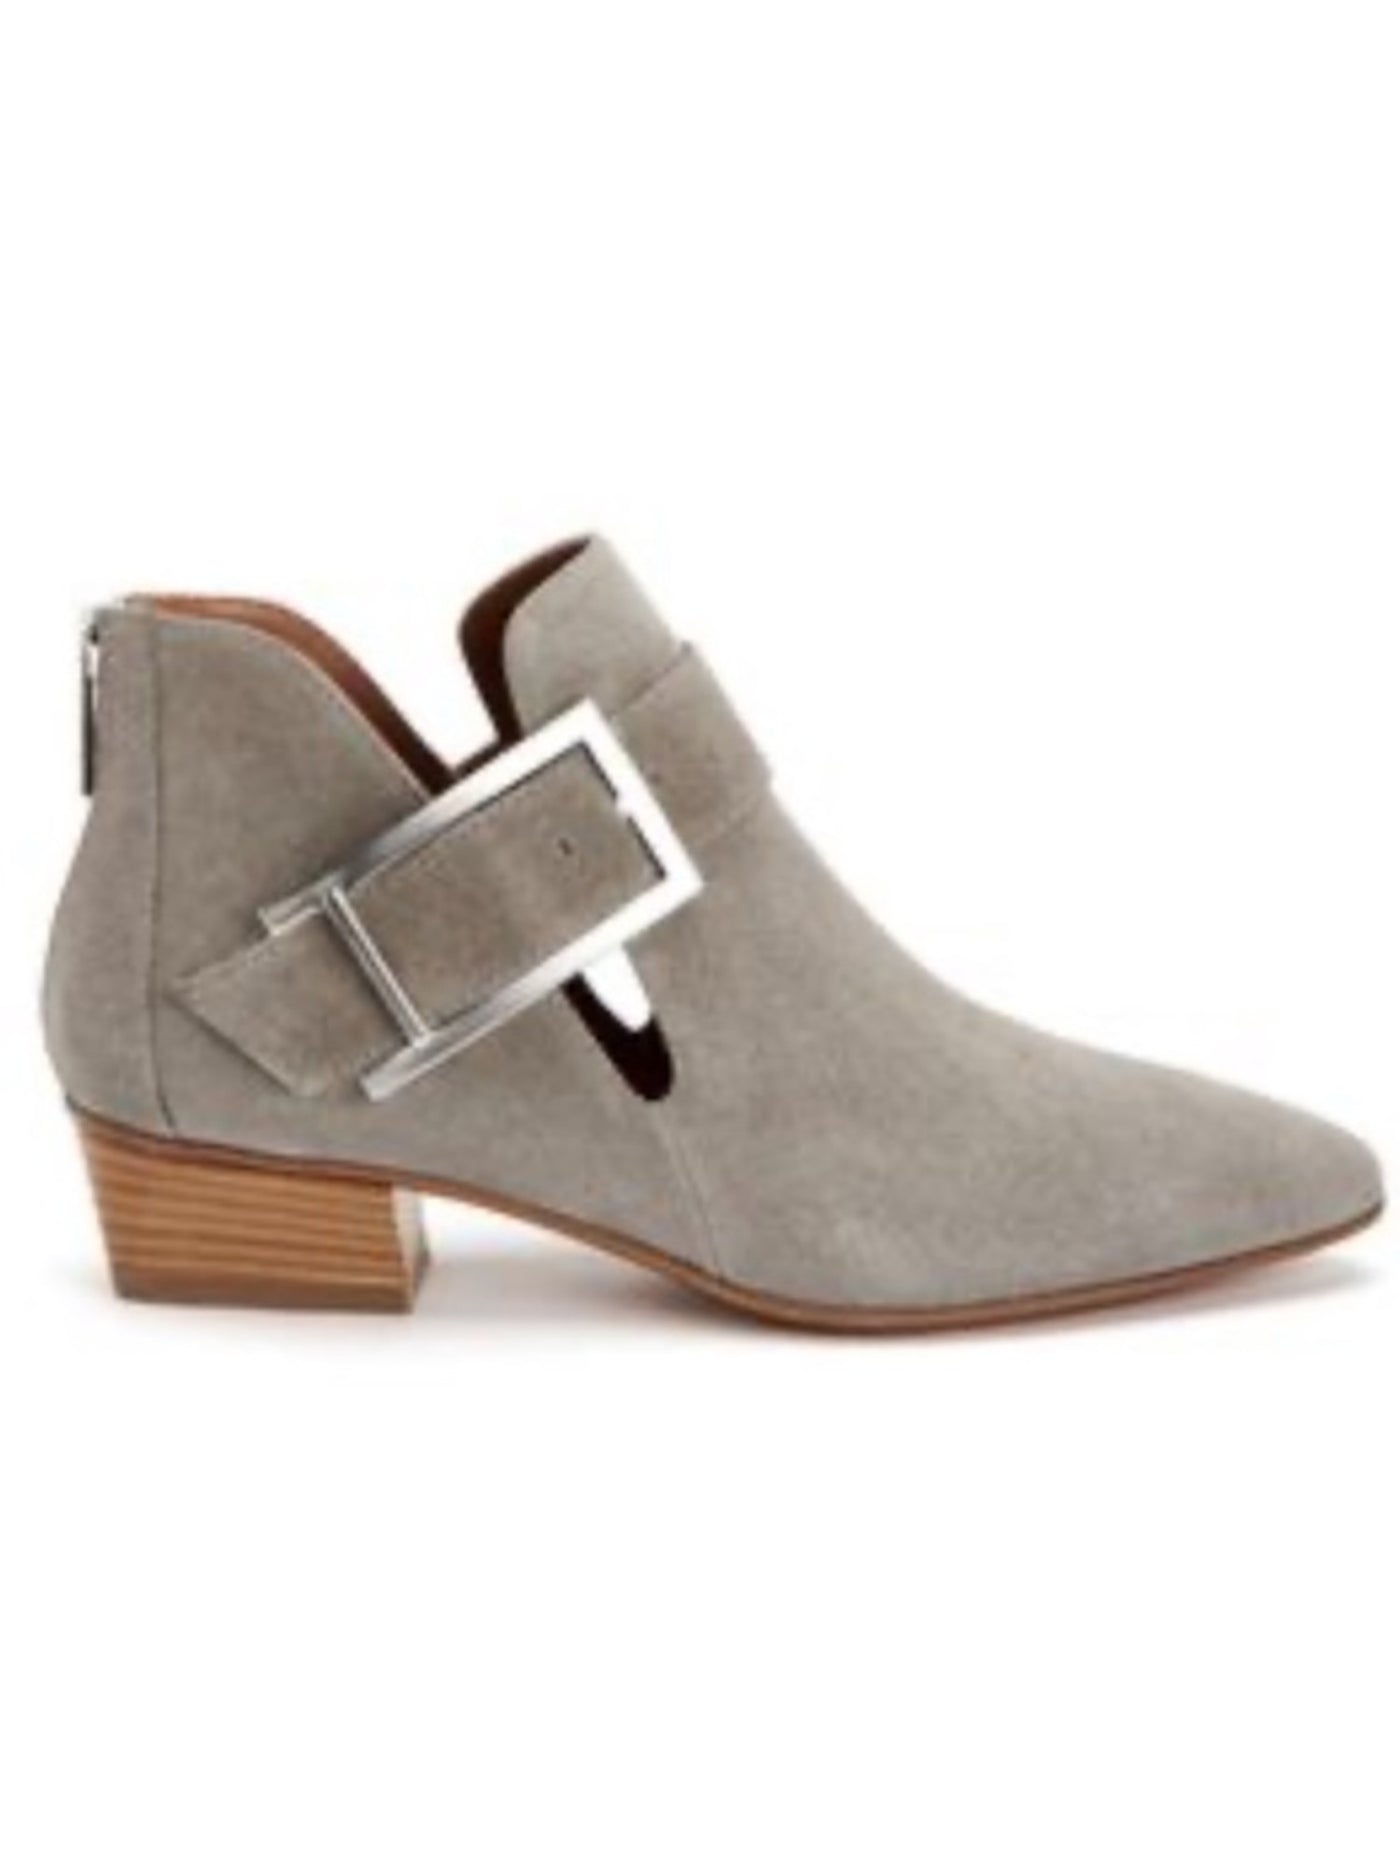 AQUATALIA Womens Gray Buckle Accent Cut Out Filomena Round Toe Block Heel Zip-Up Leather Booties 7.5 M